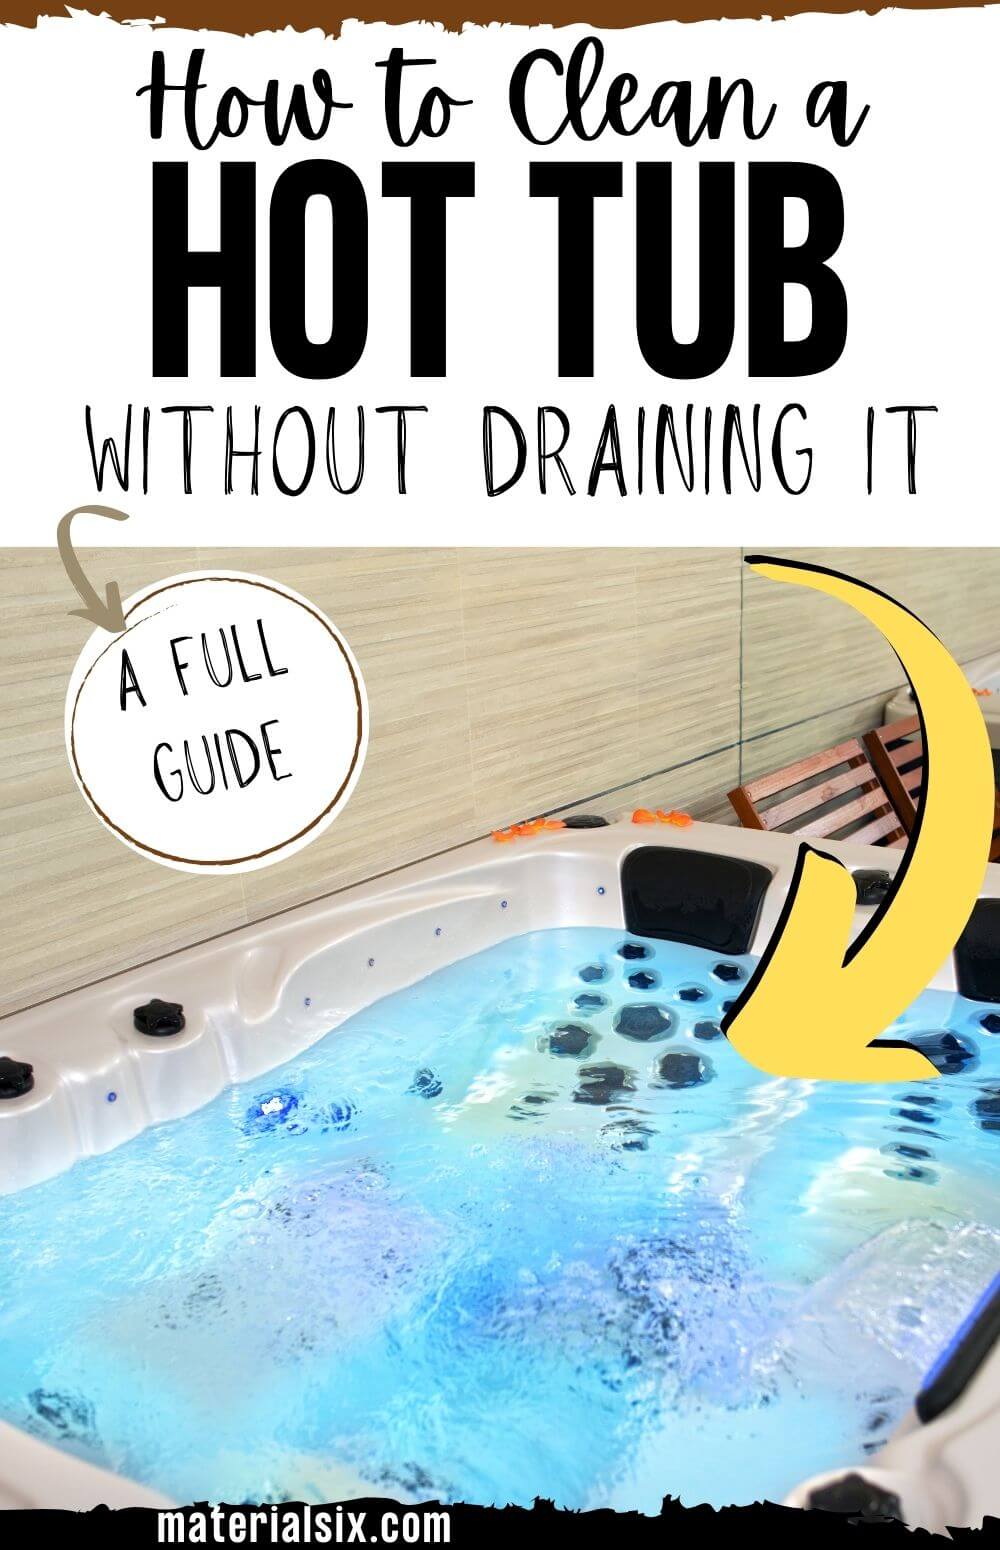 How to Clean a Hot Tub Without Draining It A Full Guide (1)